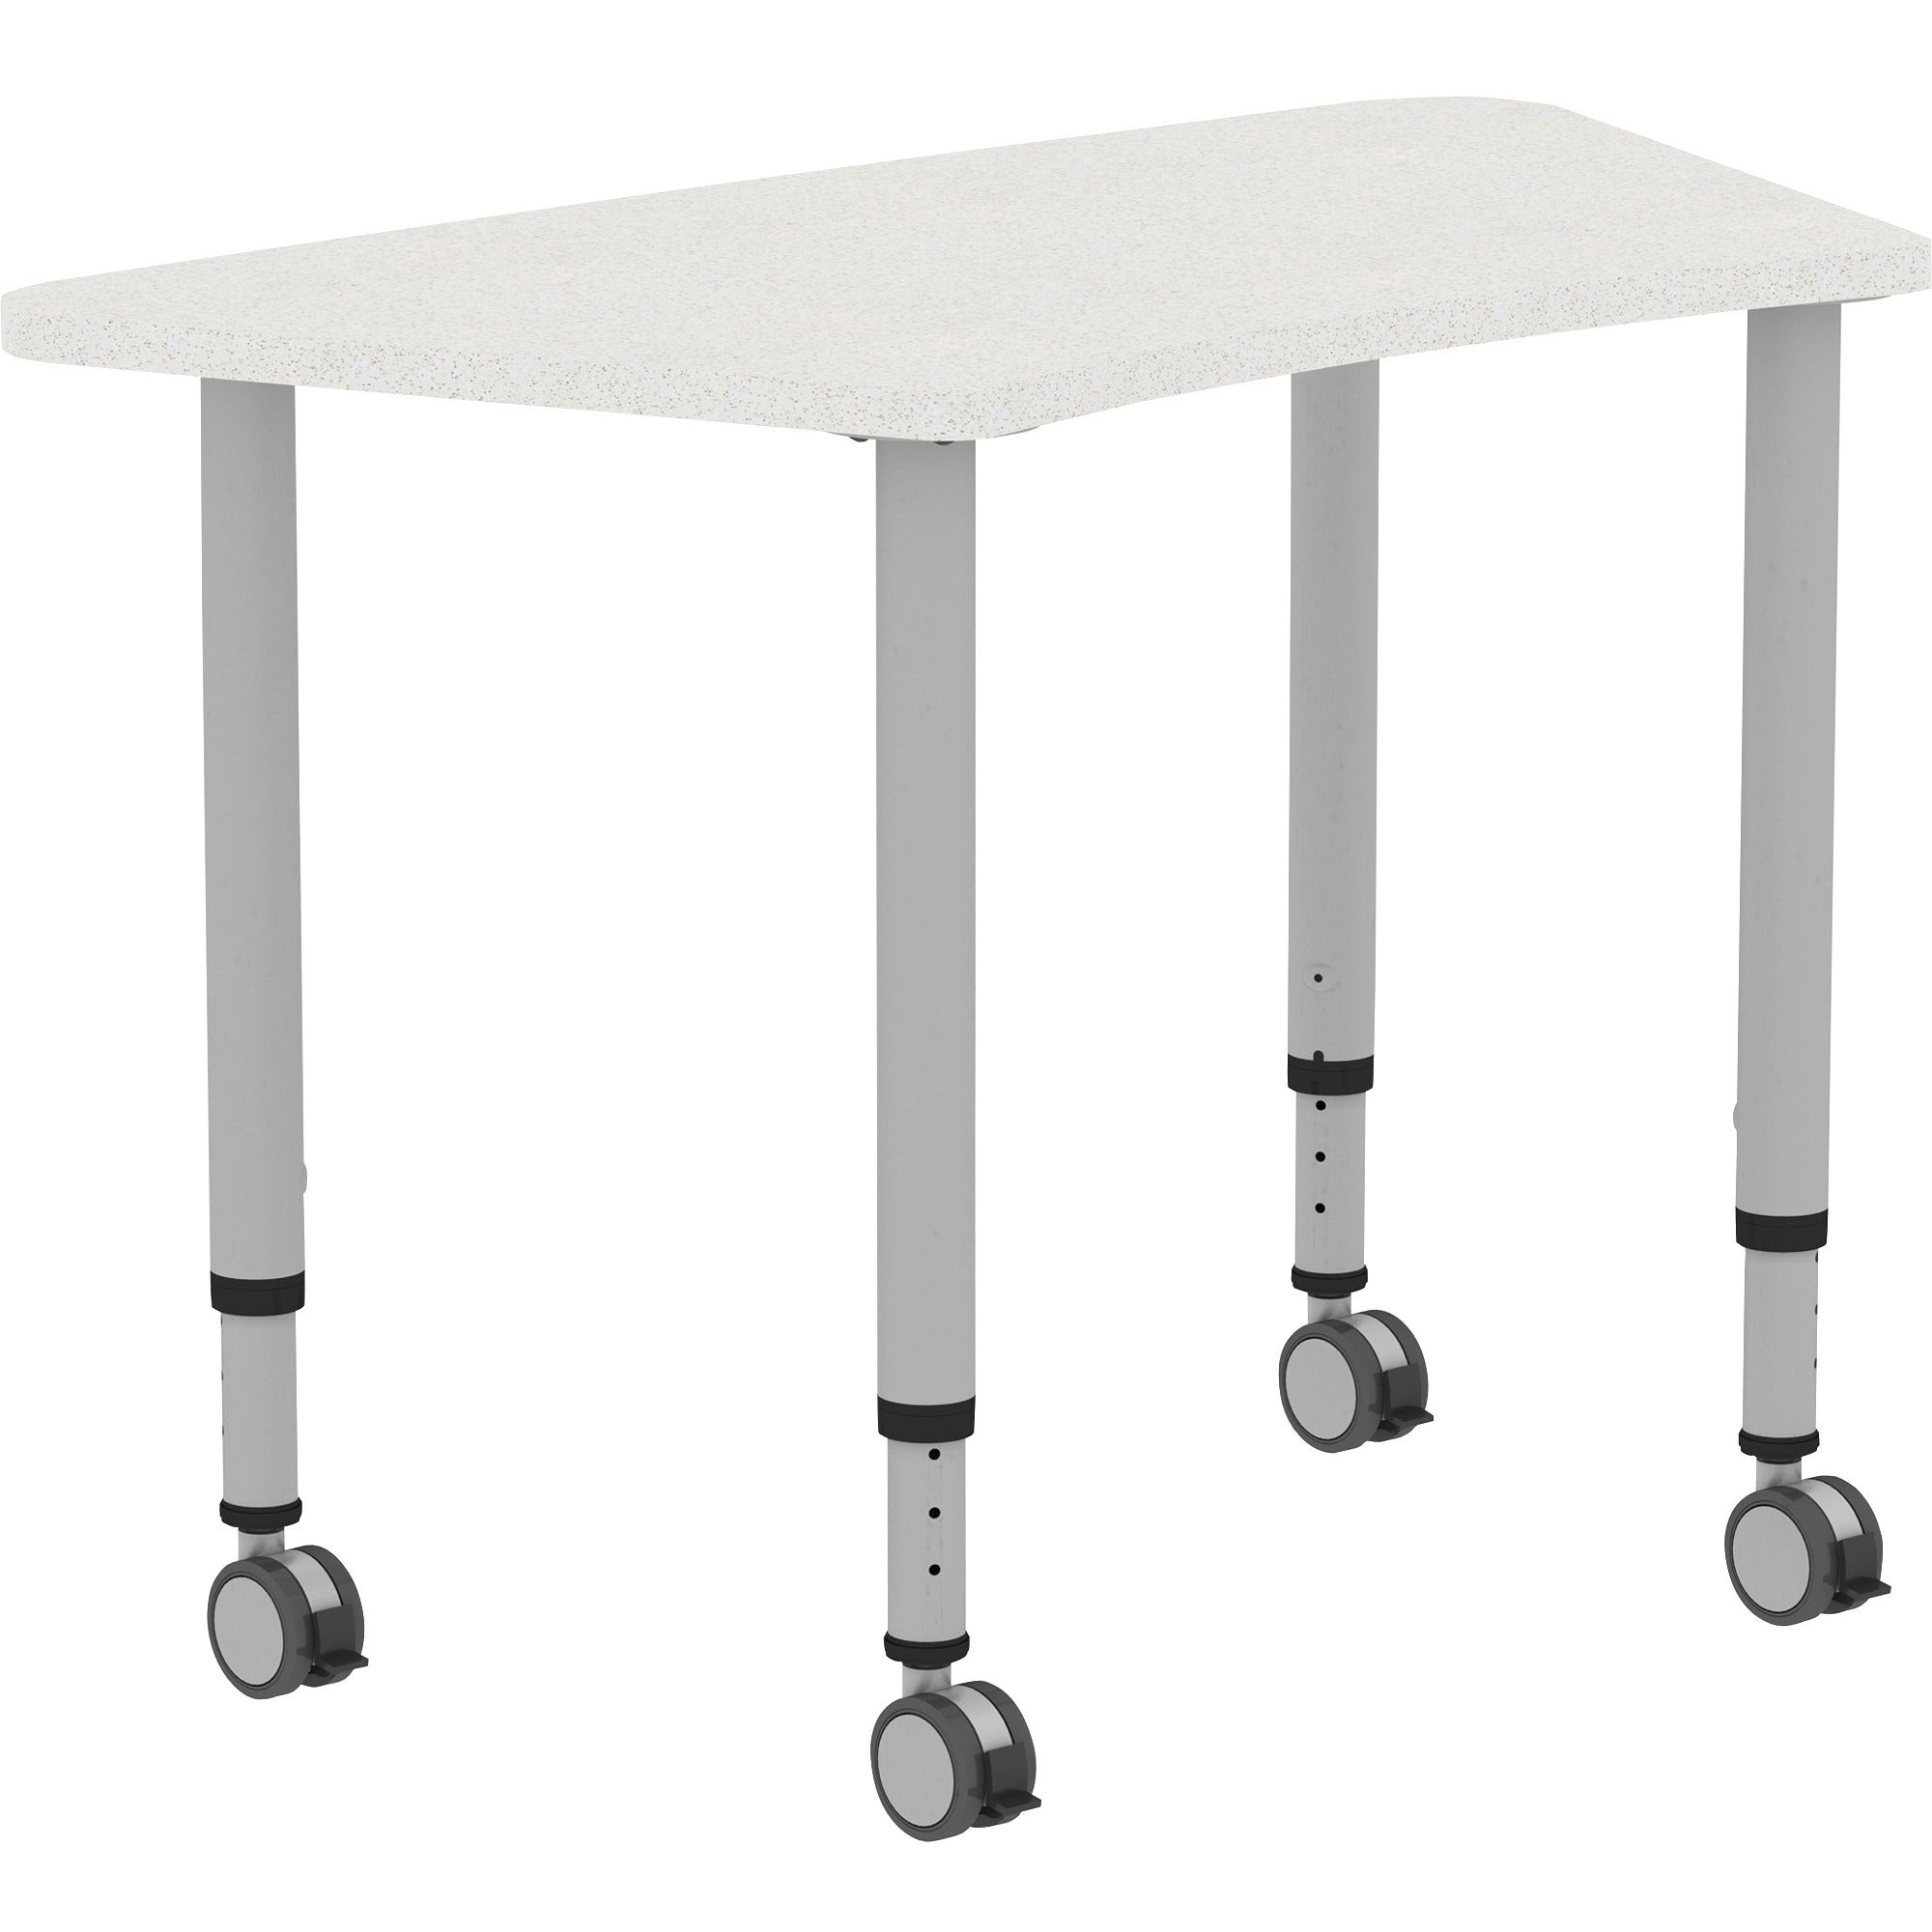 lorell-attune-height-adjustable-multipurpose-curved-table-for-table-toptrapezoid-top-adjustable-height-2662-to-3362-adjustment-x-60-table-top-width-x-2362-table-top-depth-3362-height-assembly-required-laminated-gray-laminate_llr69583 - 1